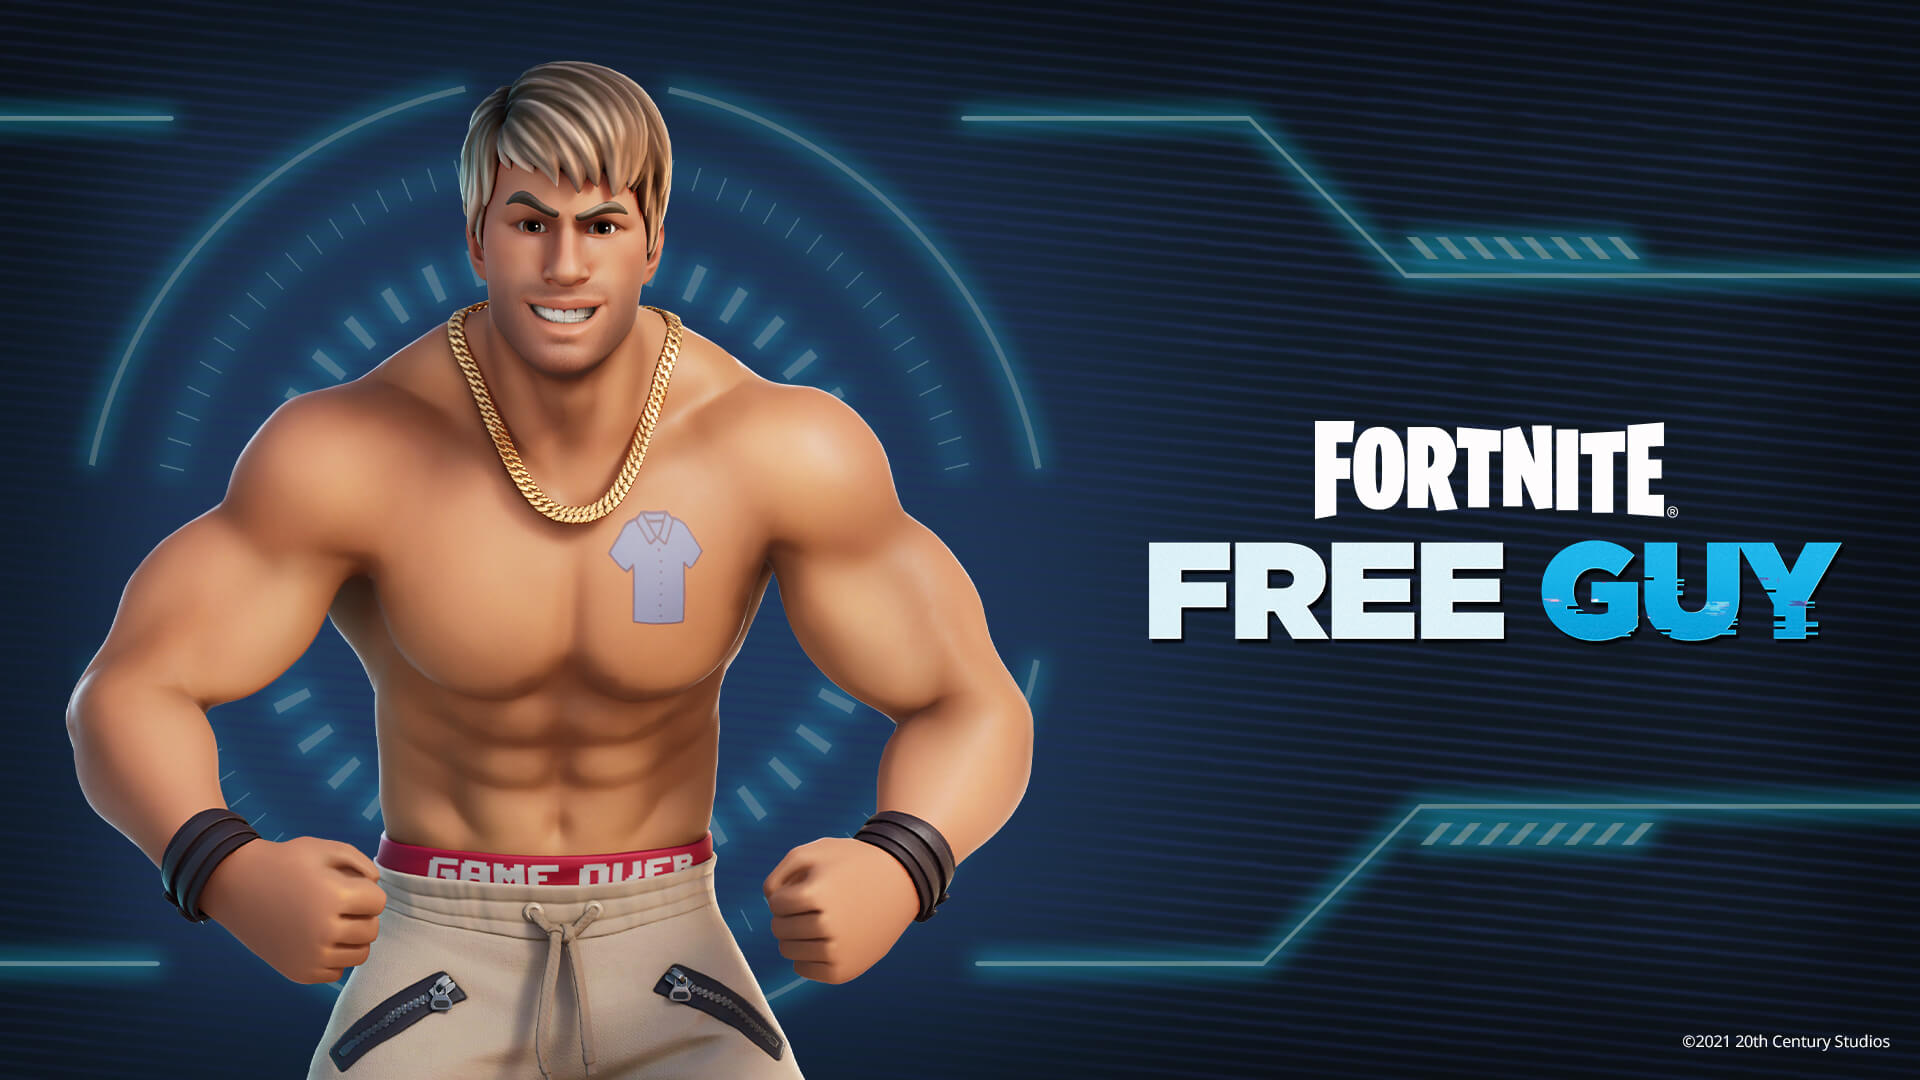 Free Guy is Coming to Fortnite with new Cosmetics